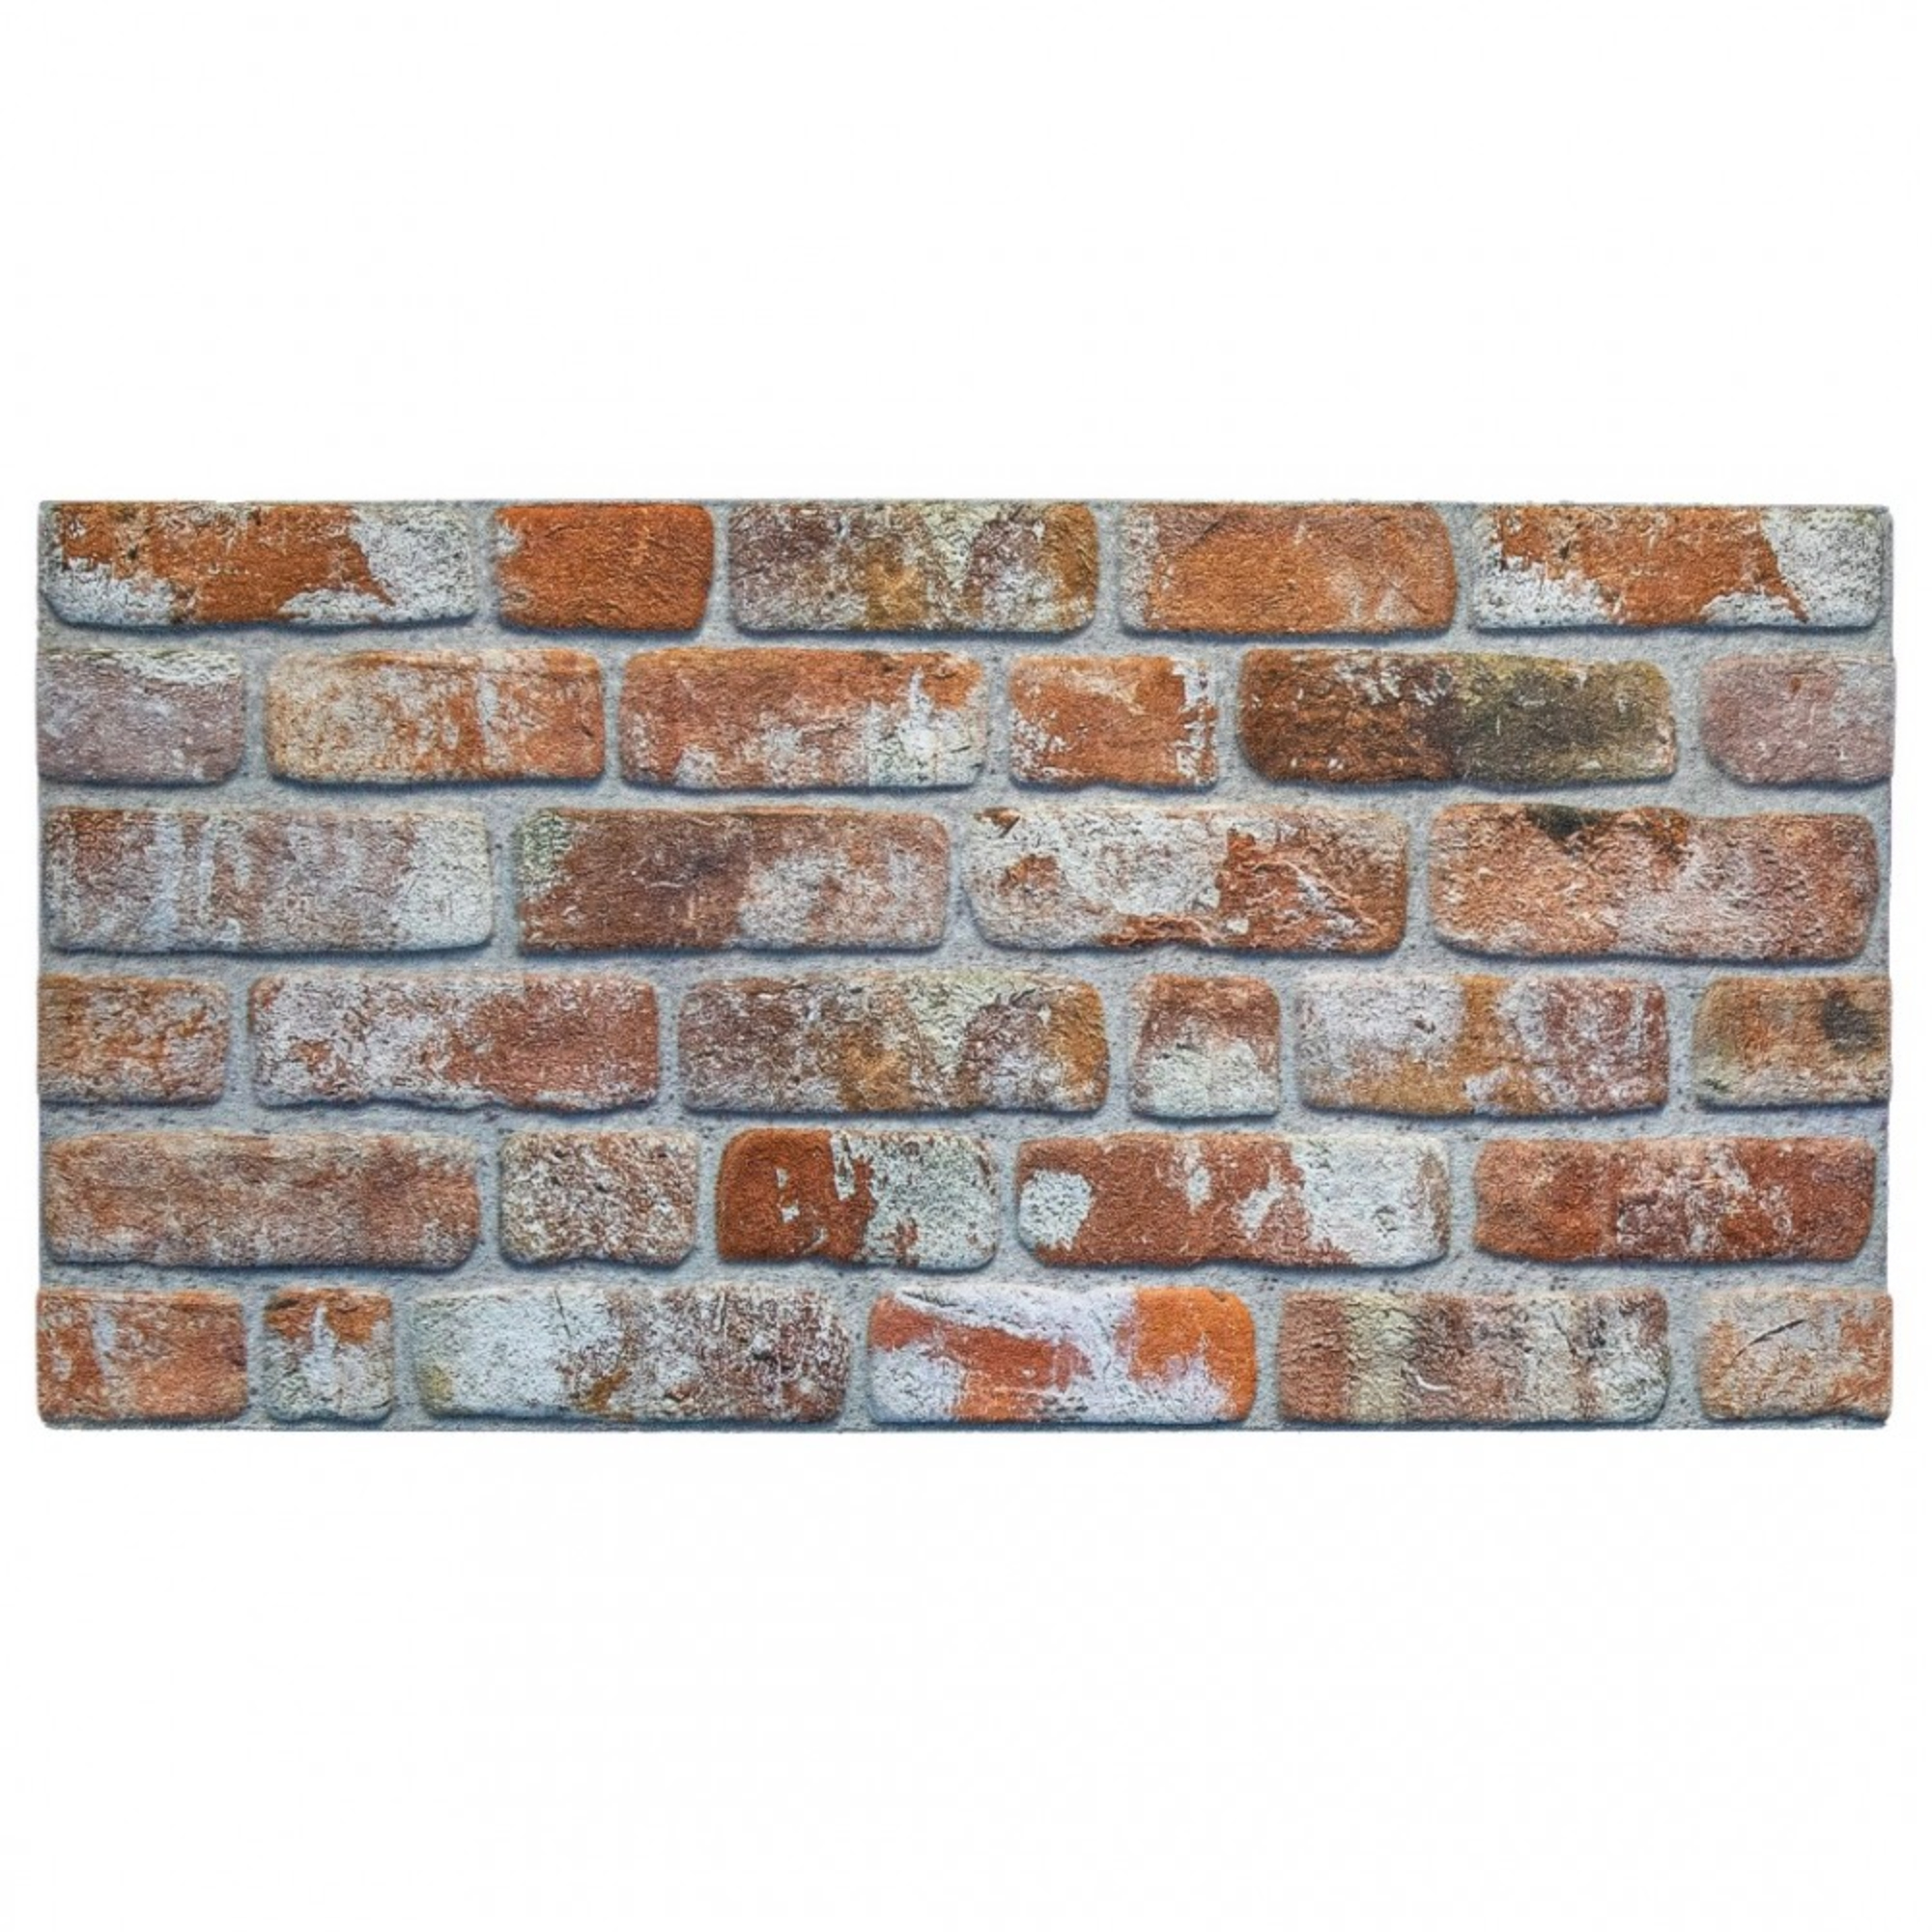 3D Wall Panels Brick Effect - Cladding, Red Grey Brown Stone Look Wall ...